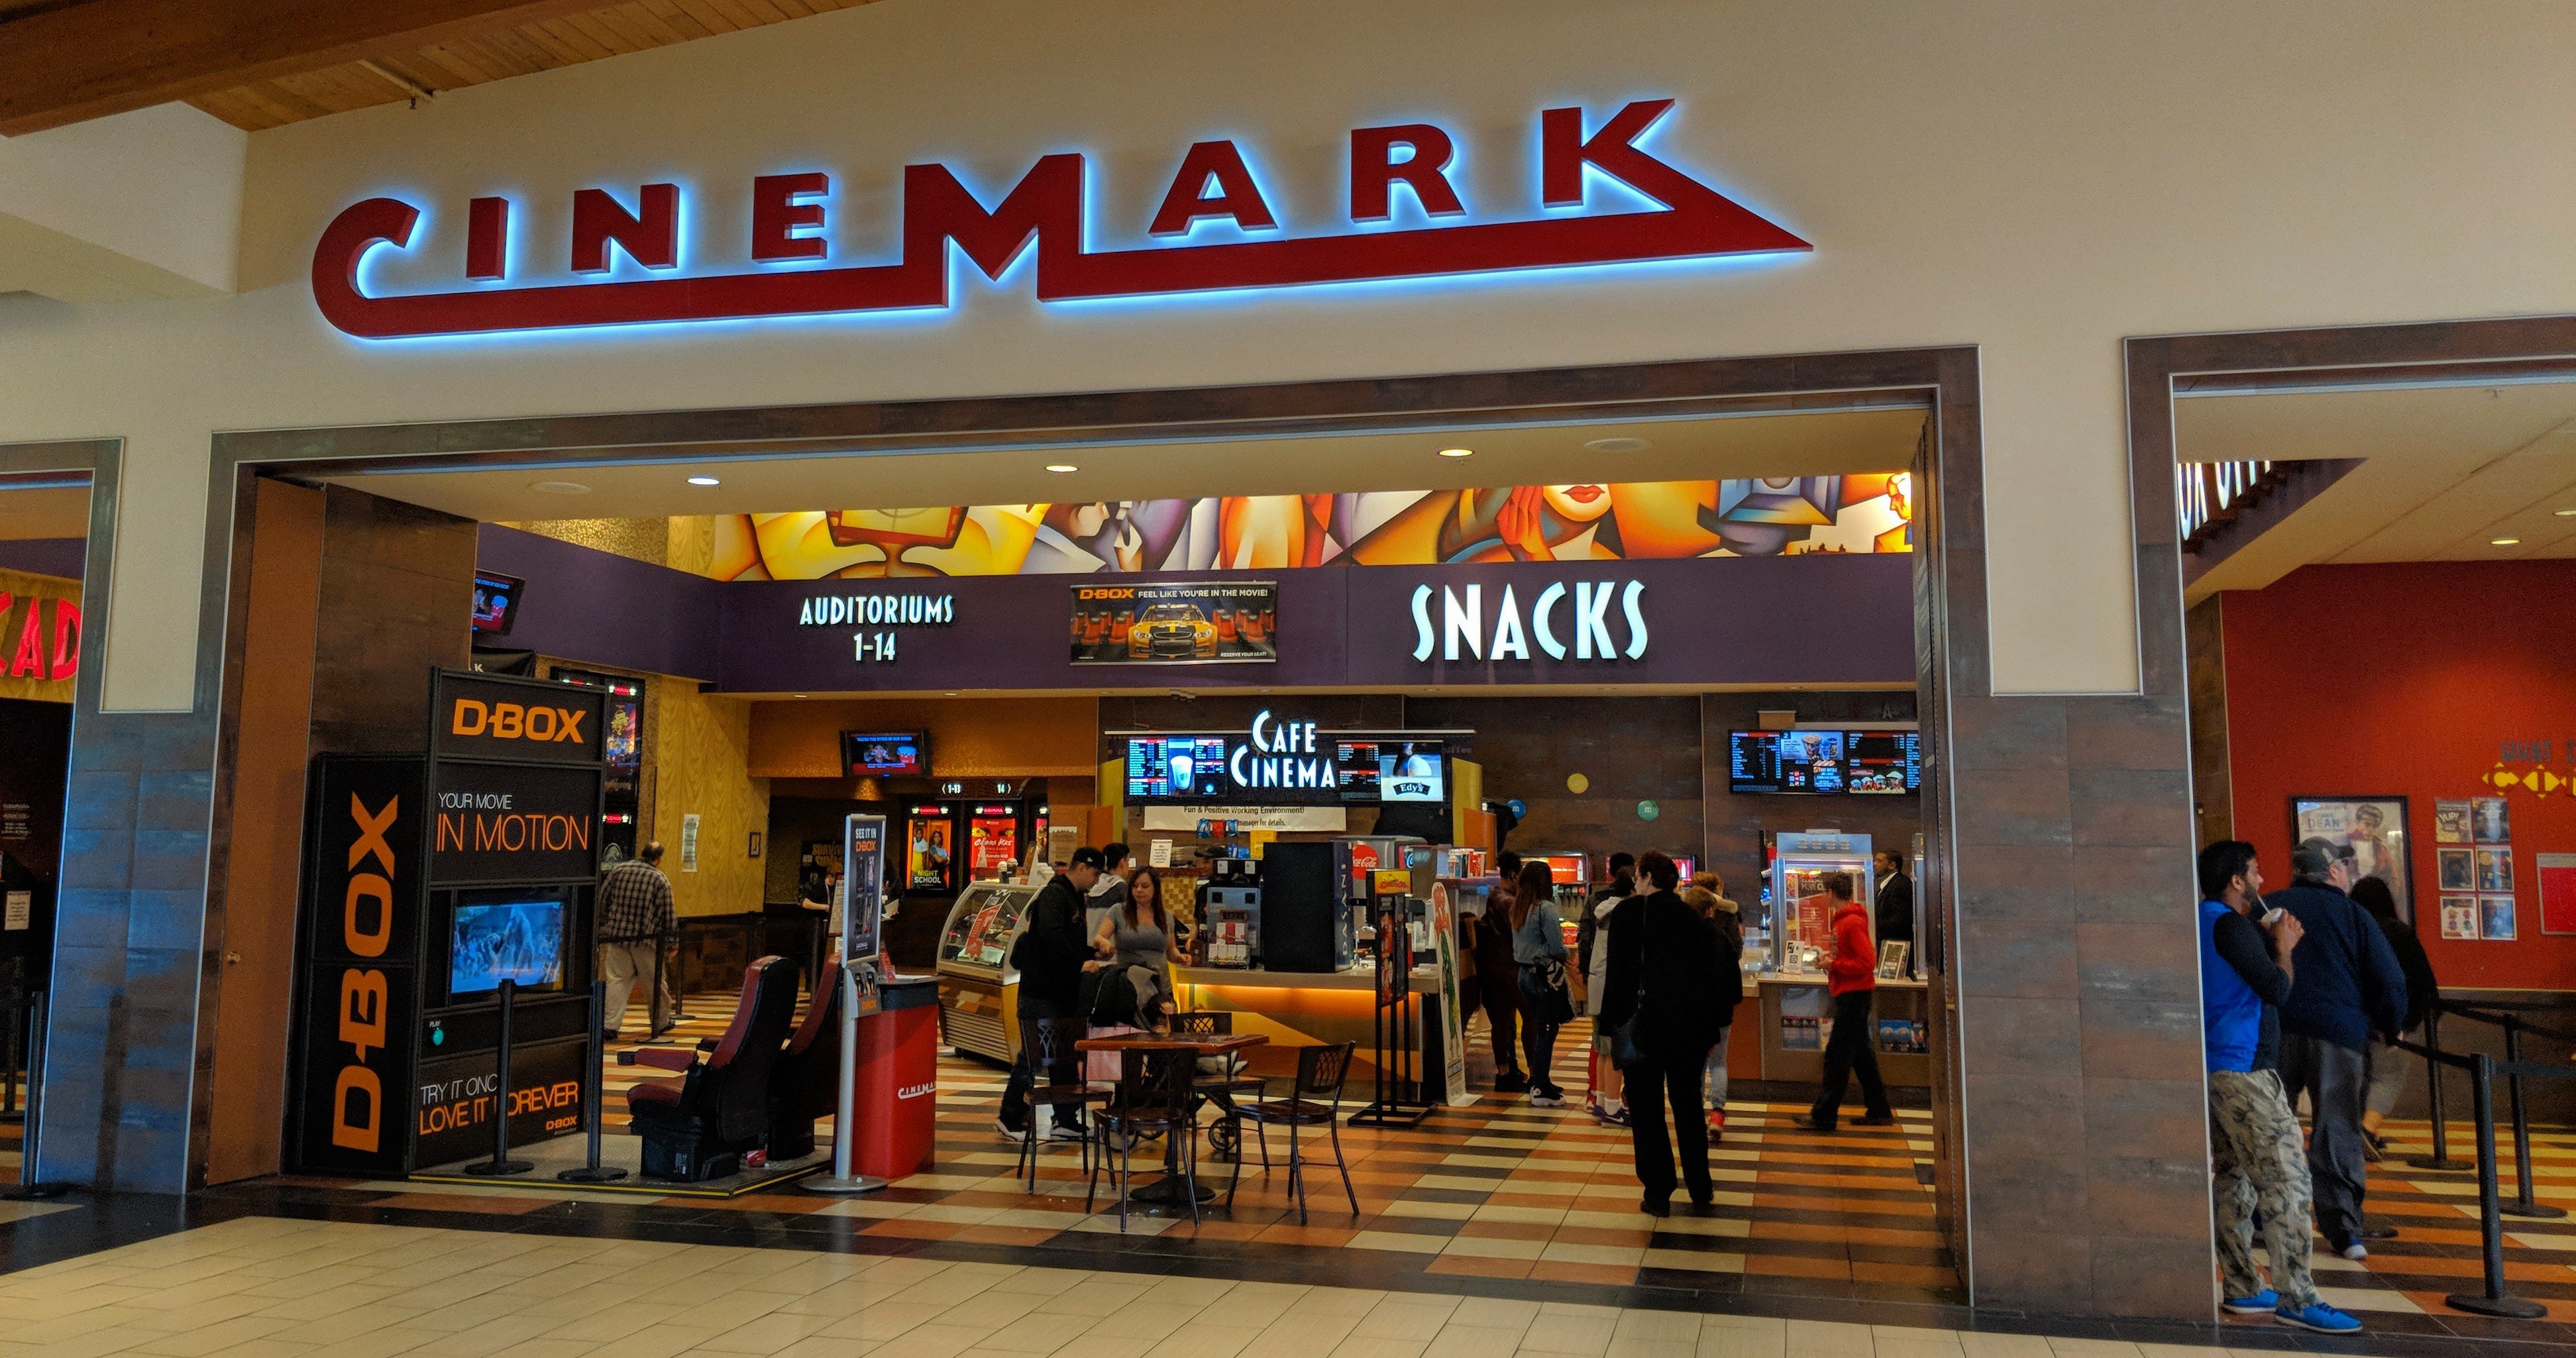 Cinemark Stock Rises as Analyst Predicts ‘Moviegoing Habits Will Return’